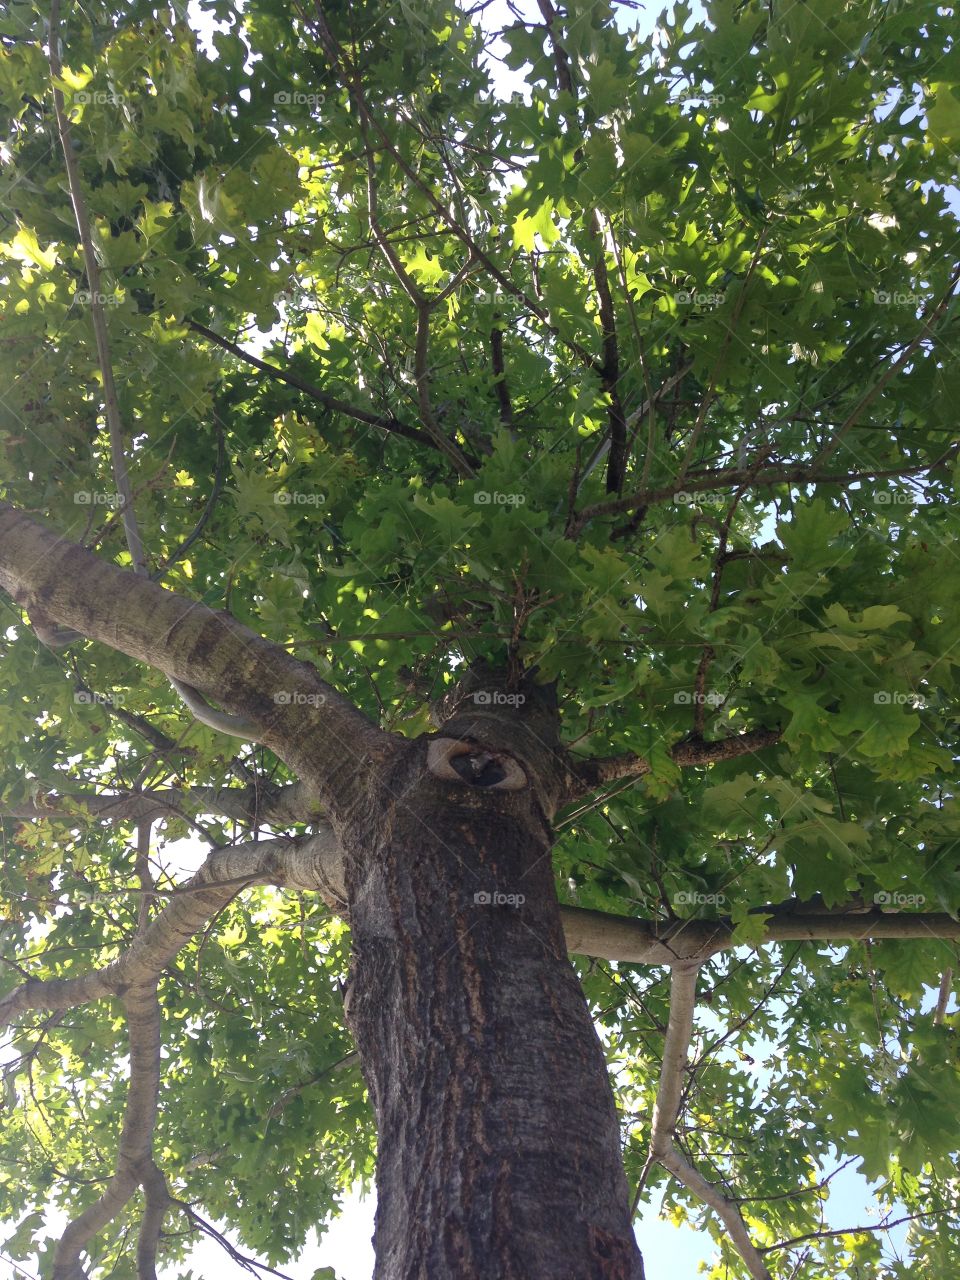 Look up. Looking up in a tree